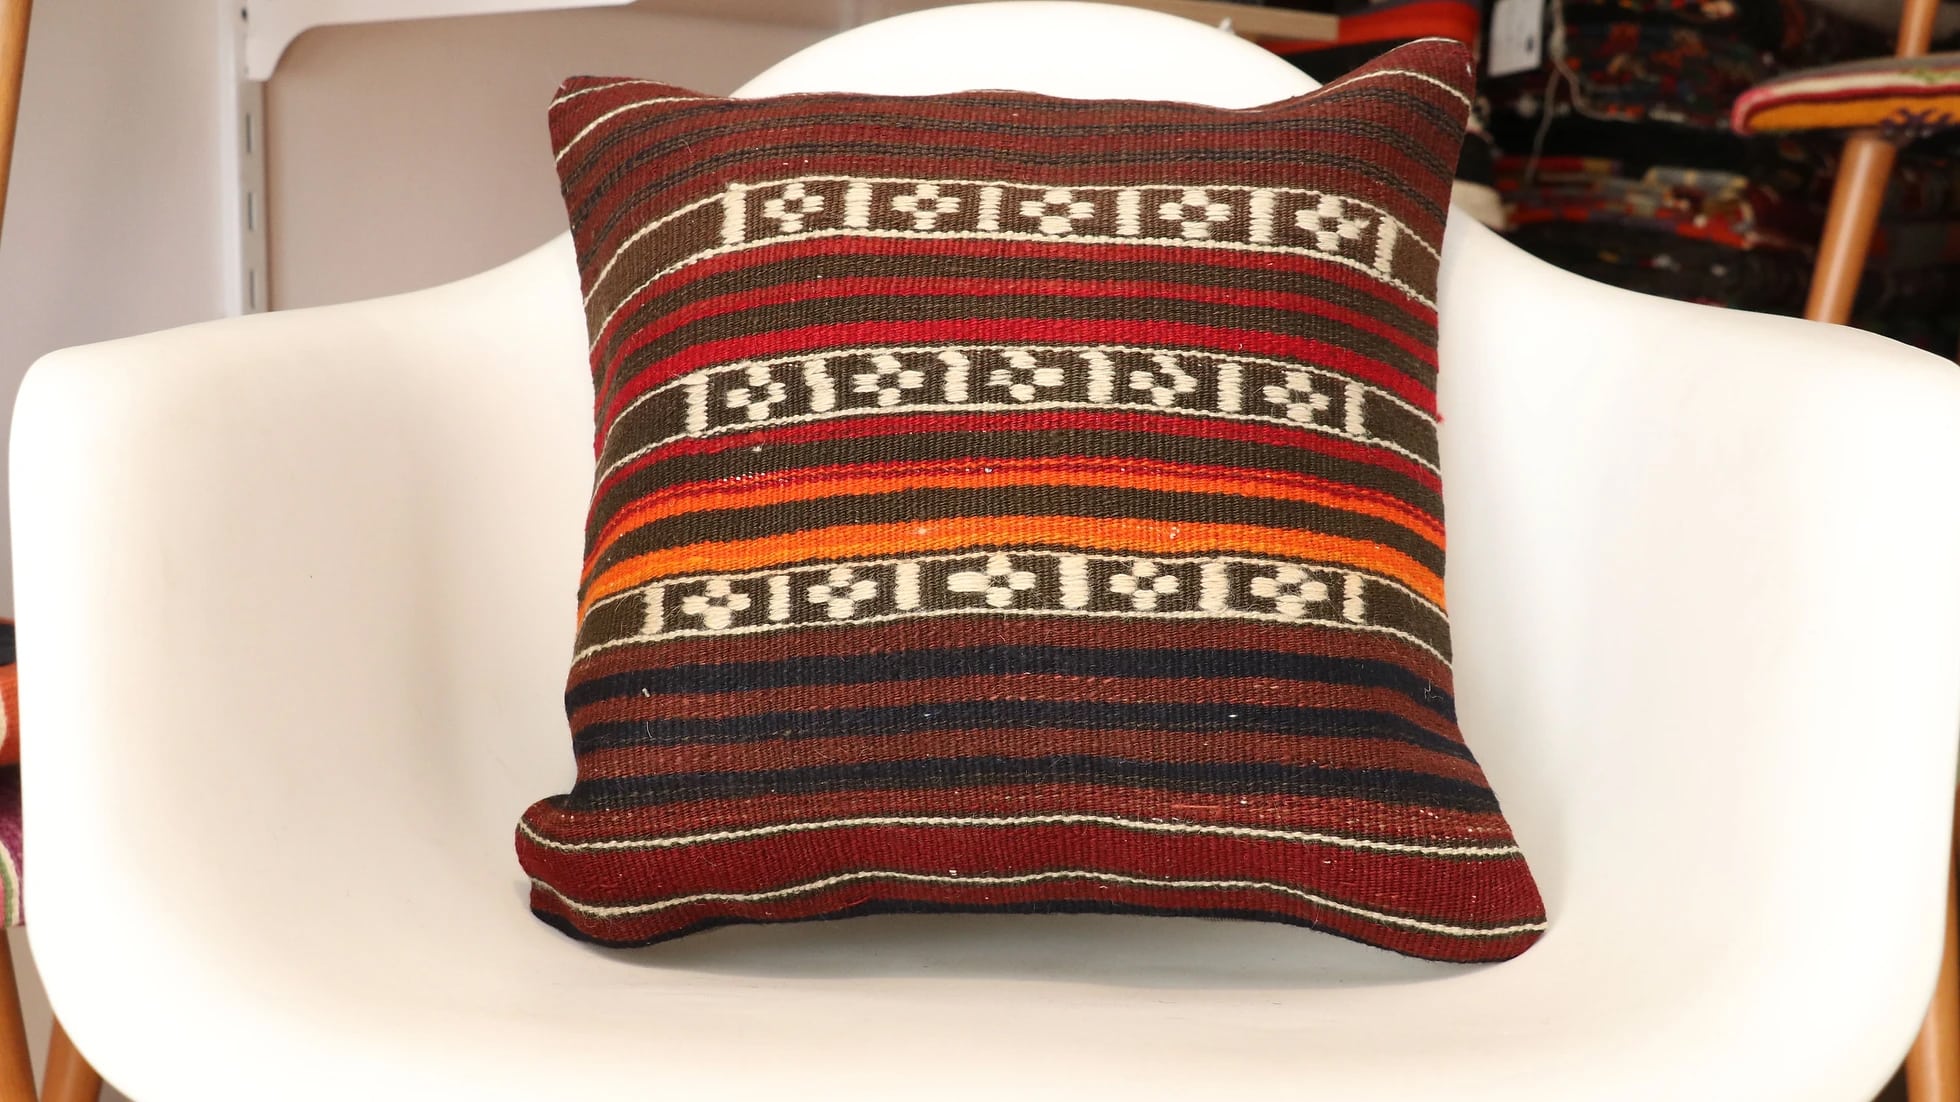 southwestern style kilim pillow decor made of wool in earthy rustic tones